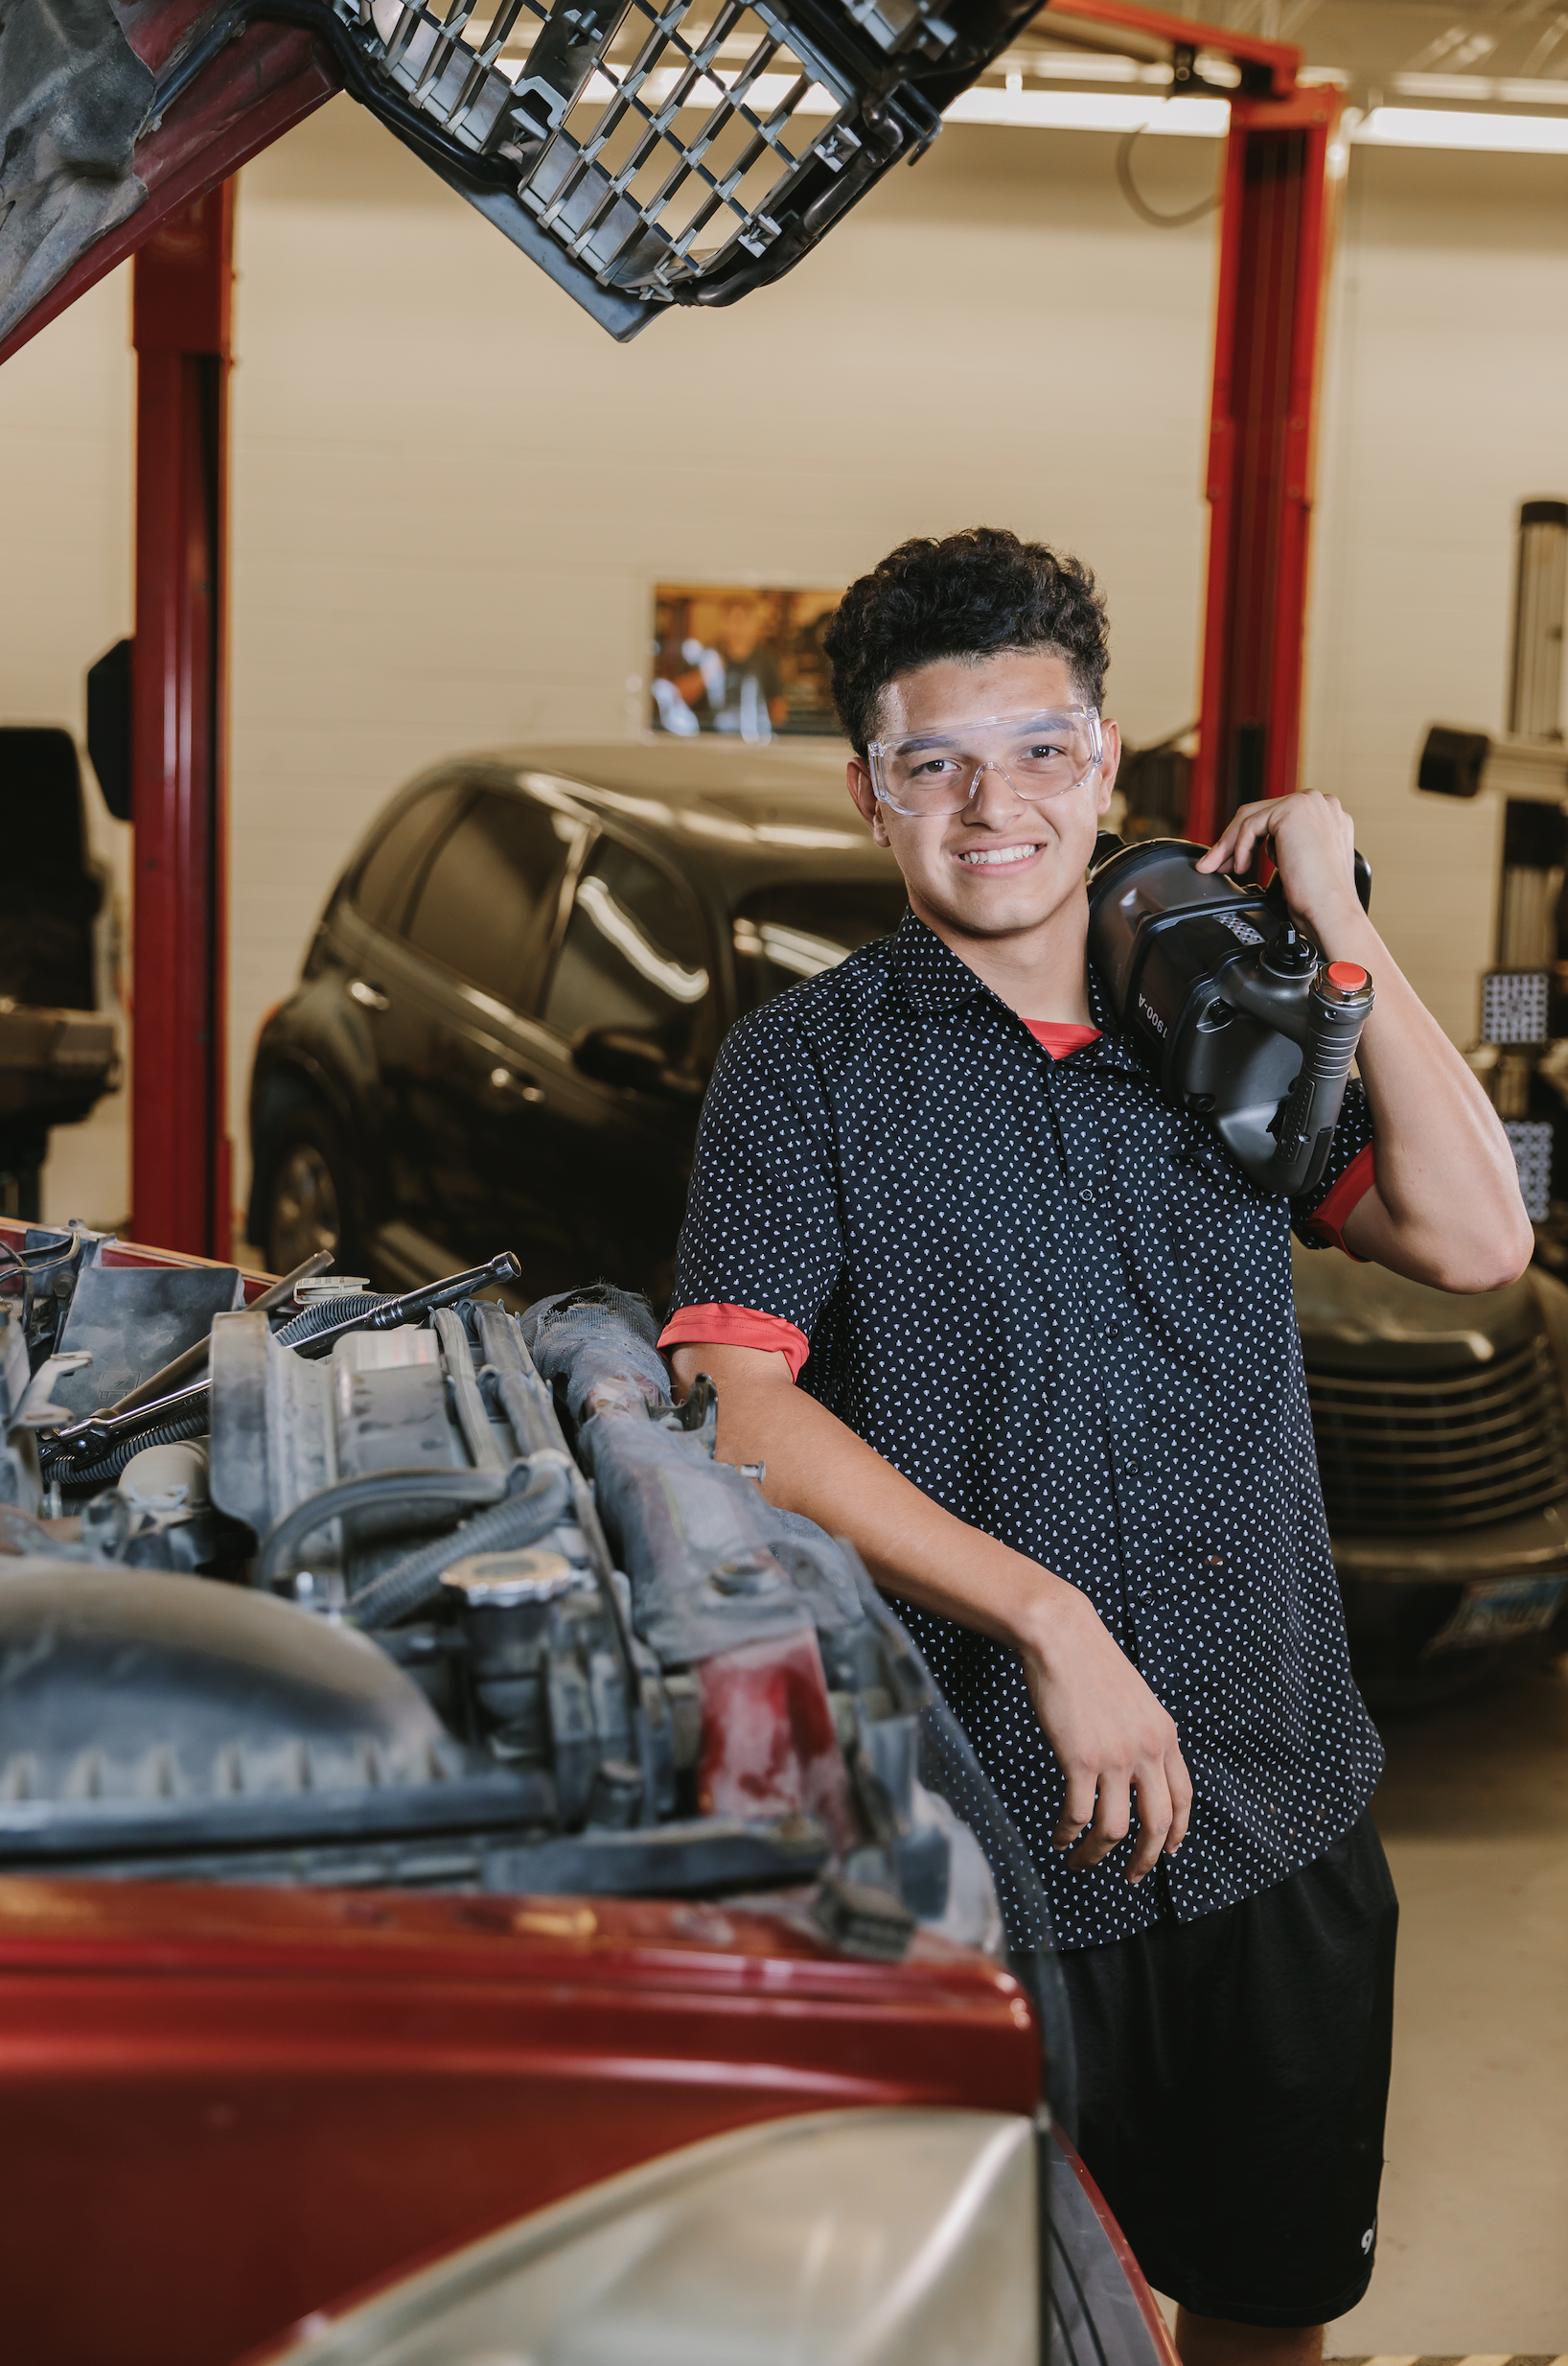 Crash Courses: Students repair and refinish vehicles in Automotive Training Academy